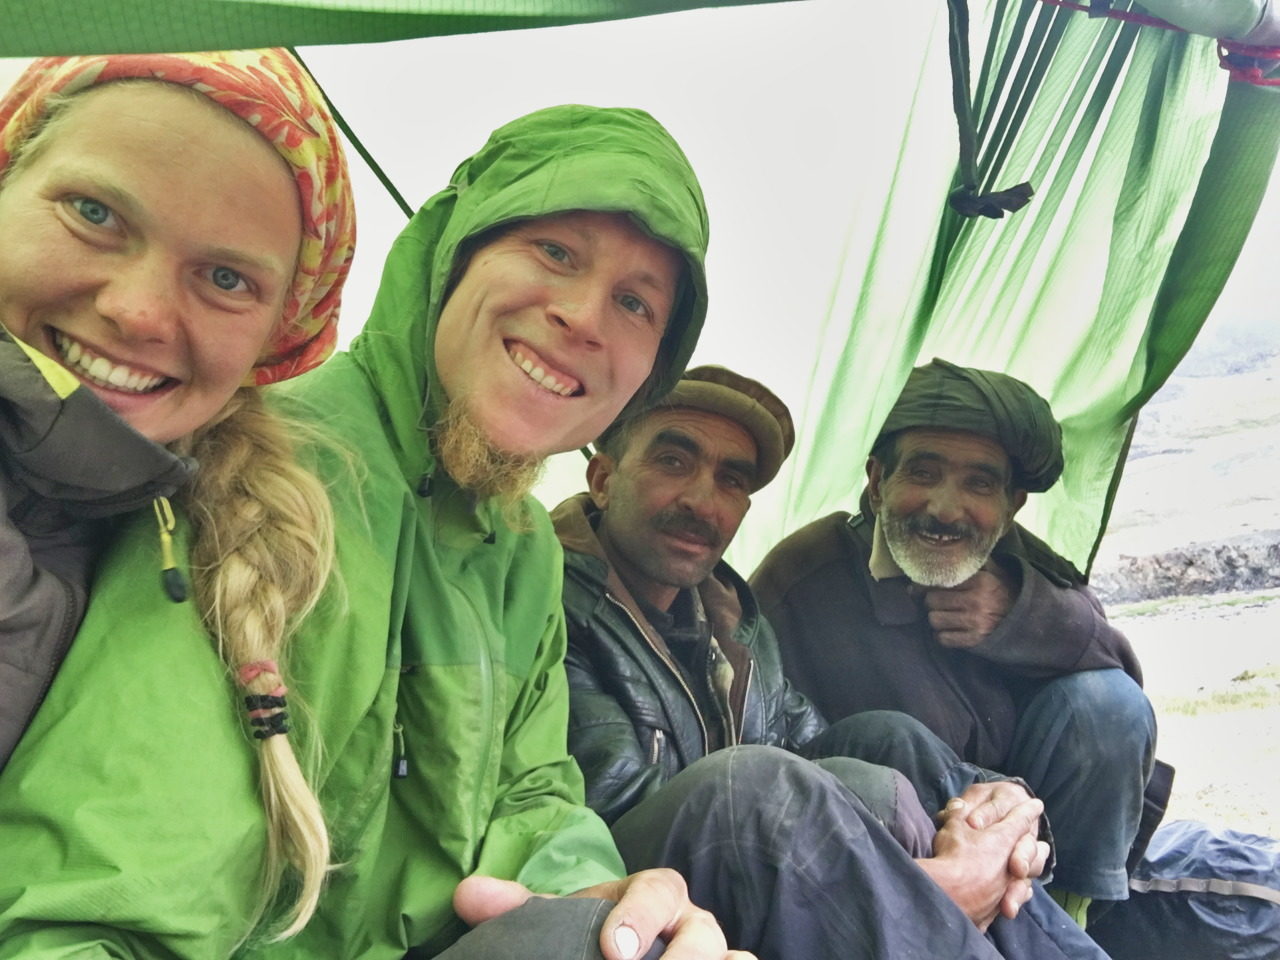 Waiting for better weather with two Afghans in a 1-Person tent